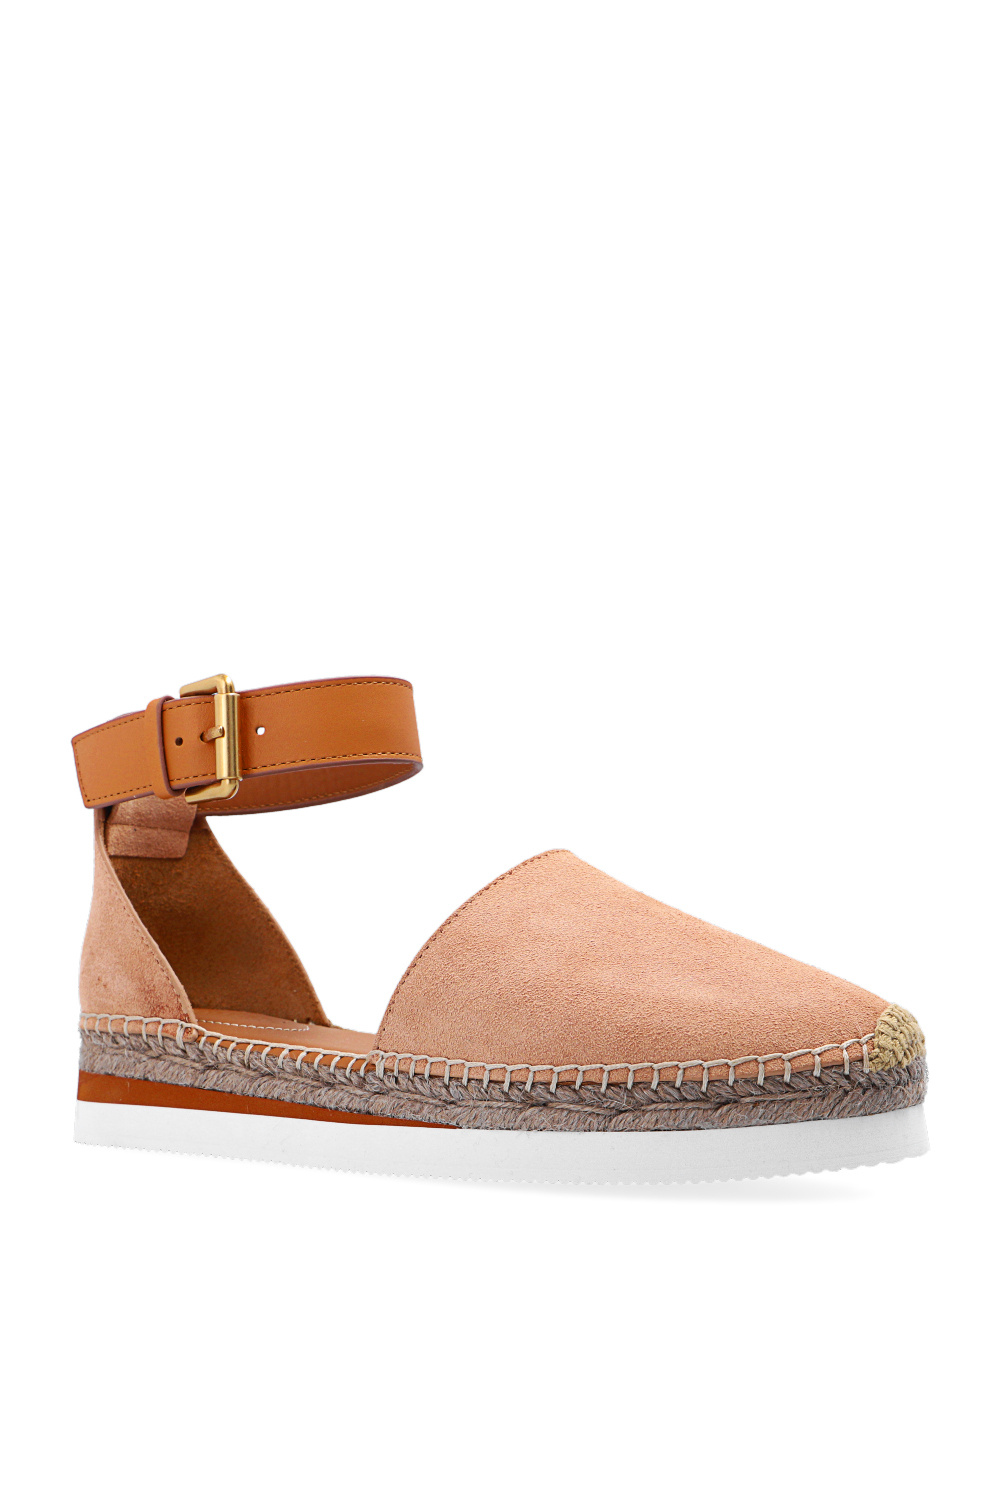 See By Chloé ‘Glyn’ espadrilles with cut-out